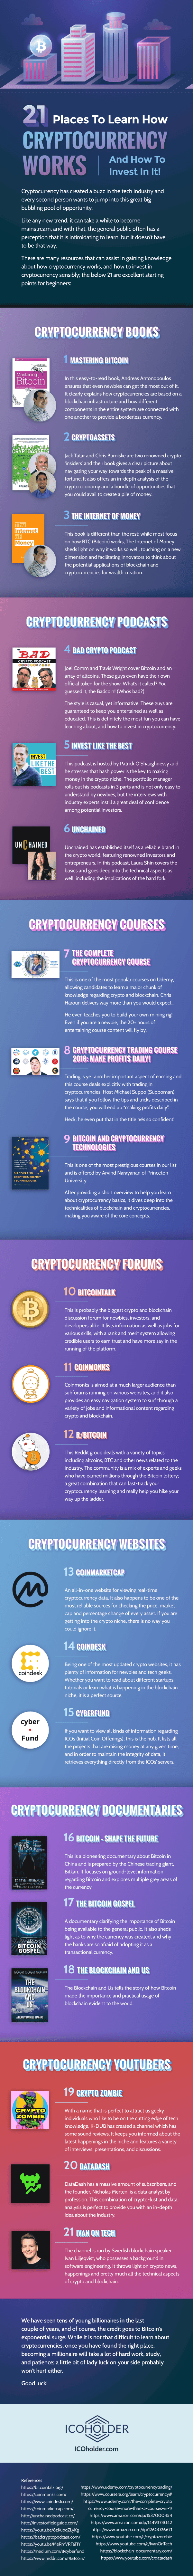 how cryptocurrency works infographic